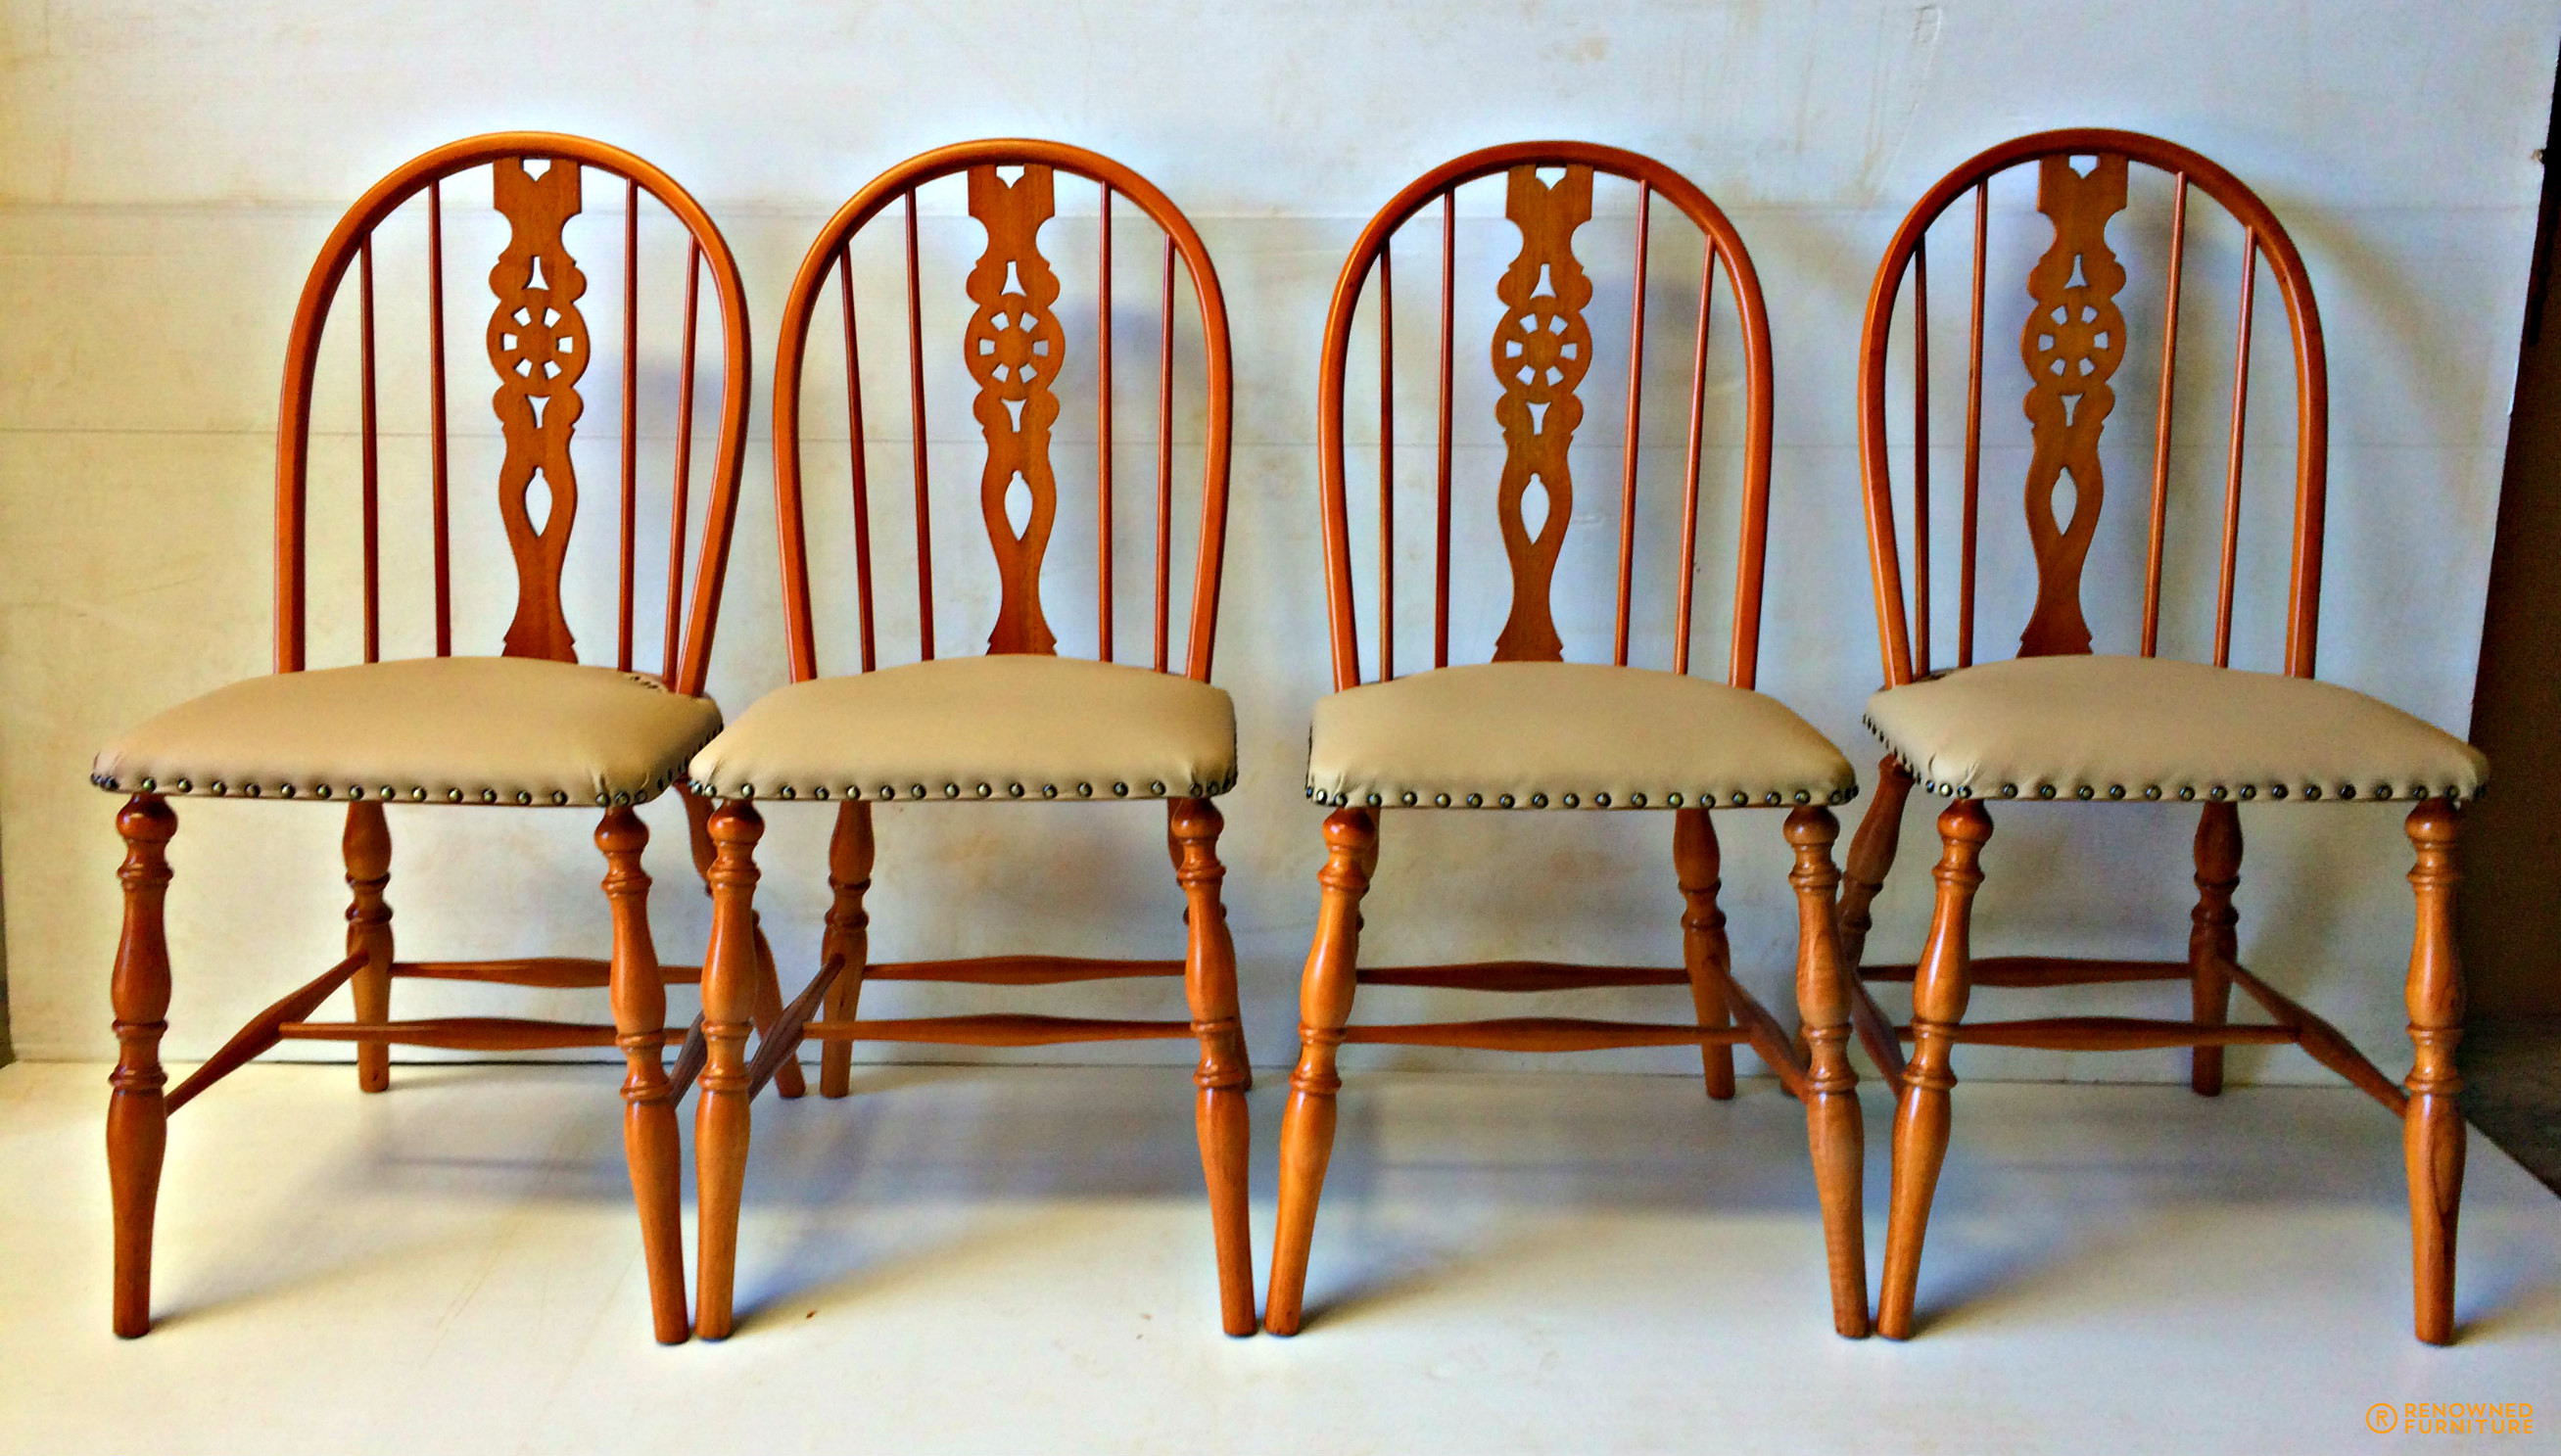 Restored dining chairs